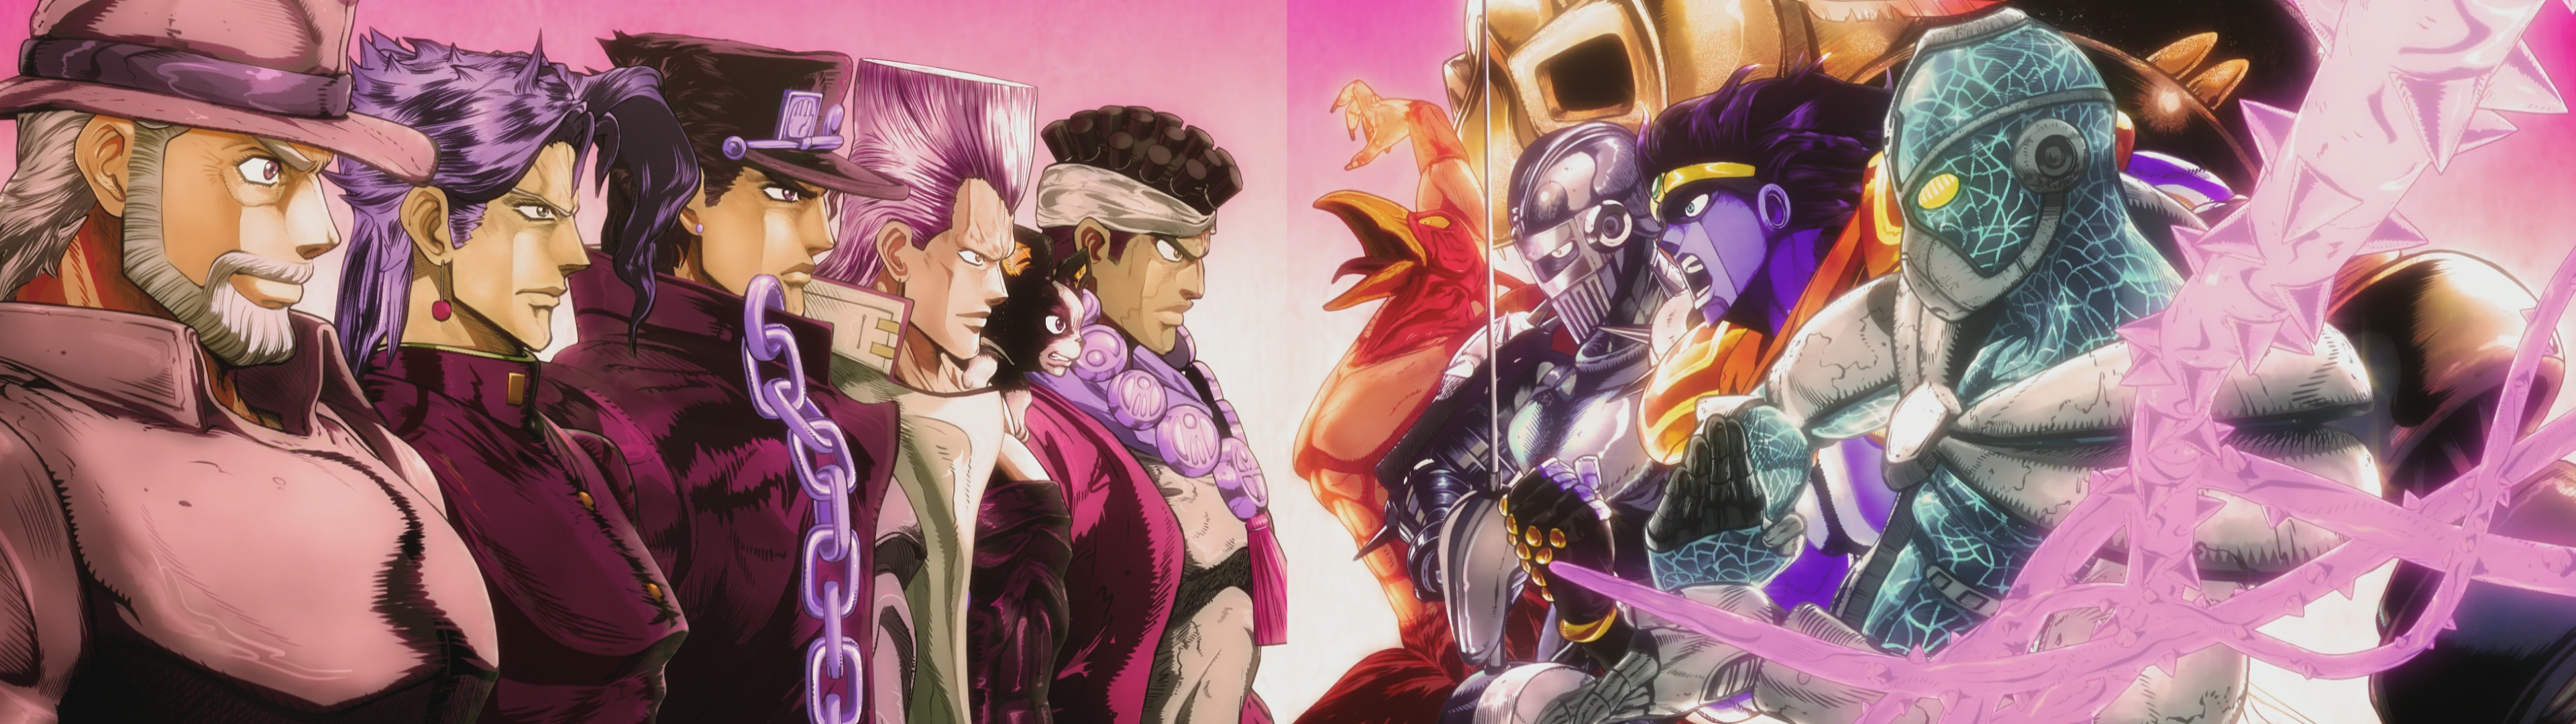 Fanart I made this dual screen desktop wallpaper (3840 x 1080) with the Crusaders facing their Stands from Sono Chi no Kioku that maybe some of you guys could use